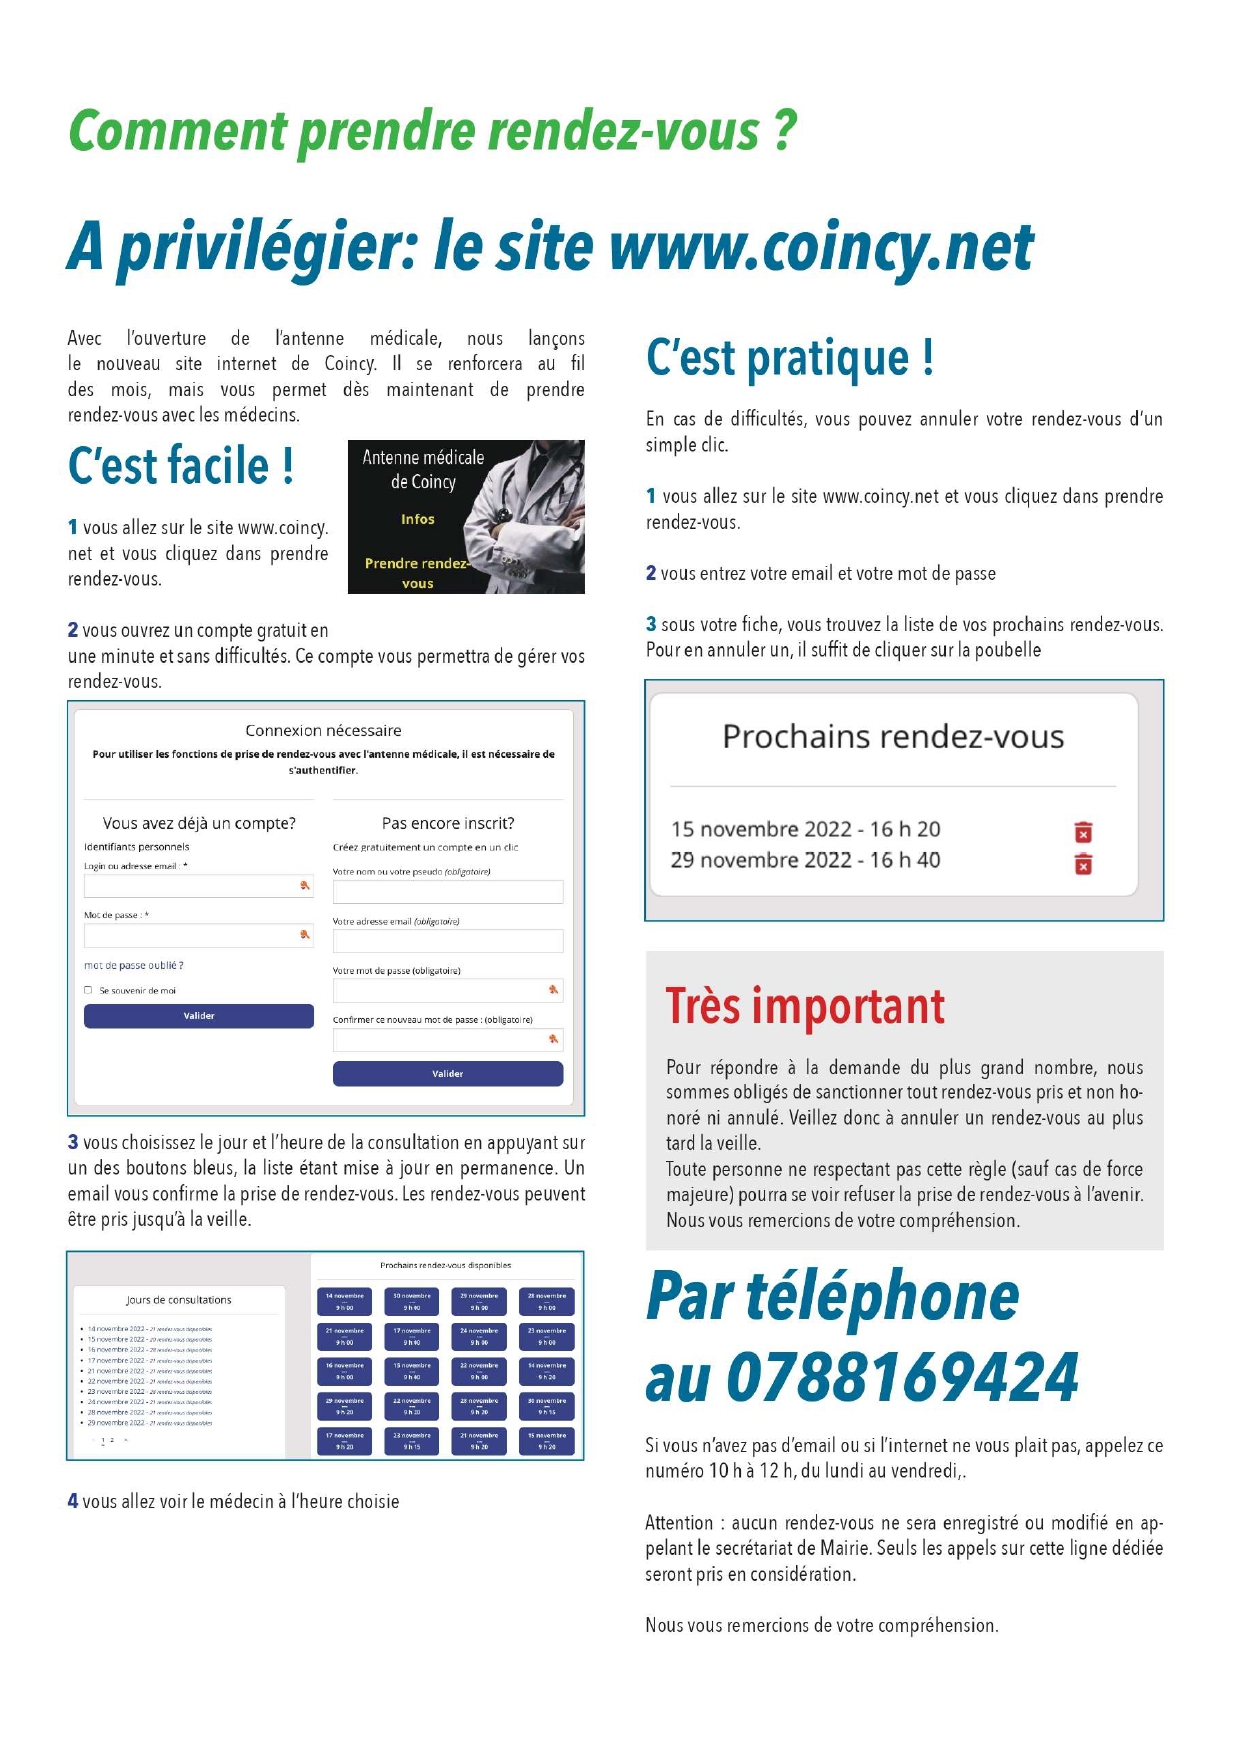 ANTENNE MEDICALE PAGE 2